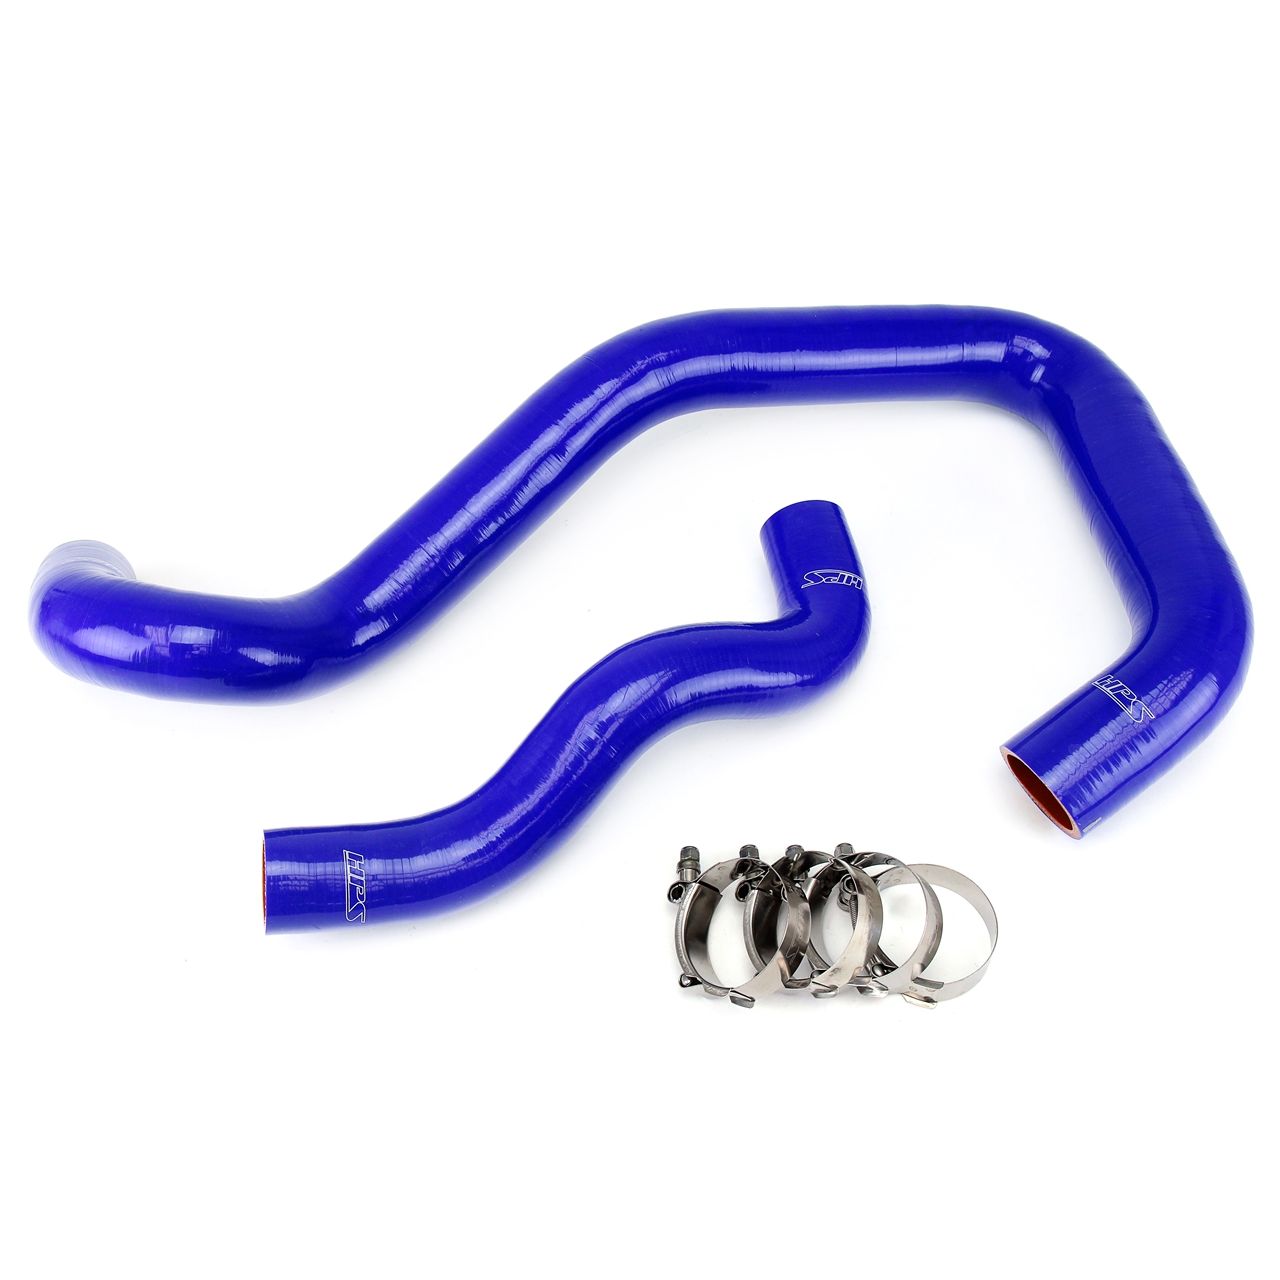 HPS Blue Reinforced Silicone Radiator Hose Kit Coolant for Ford 03-07 Excursion 6.0L Diesel w/ Mono Beam Suspension